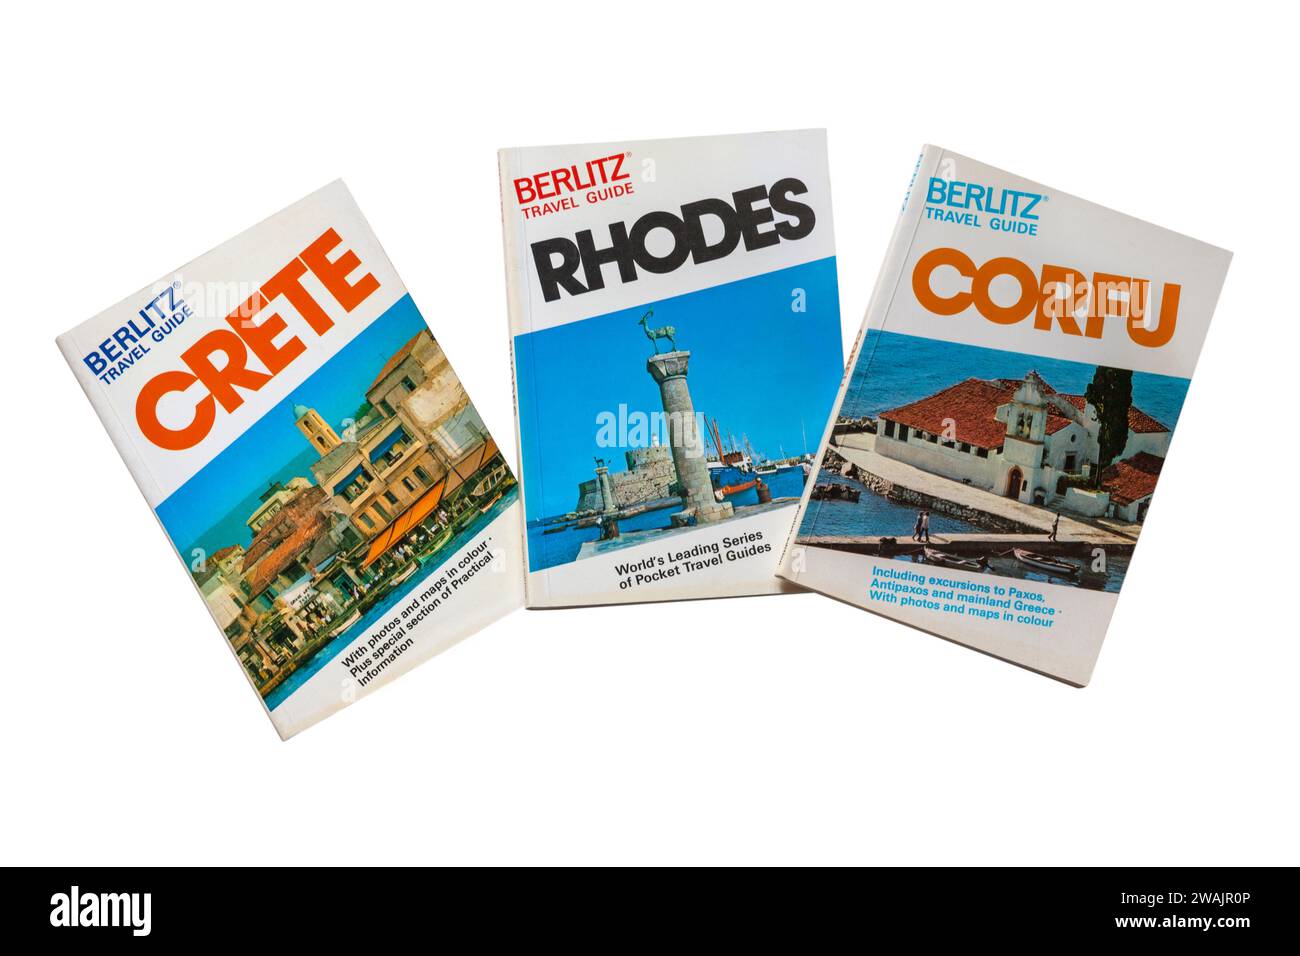 Berlitz Travel Guide books Travel Guidebooks for Greek Islands Crete, Corfu and Rhodes isolated on white background Stock Photo